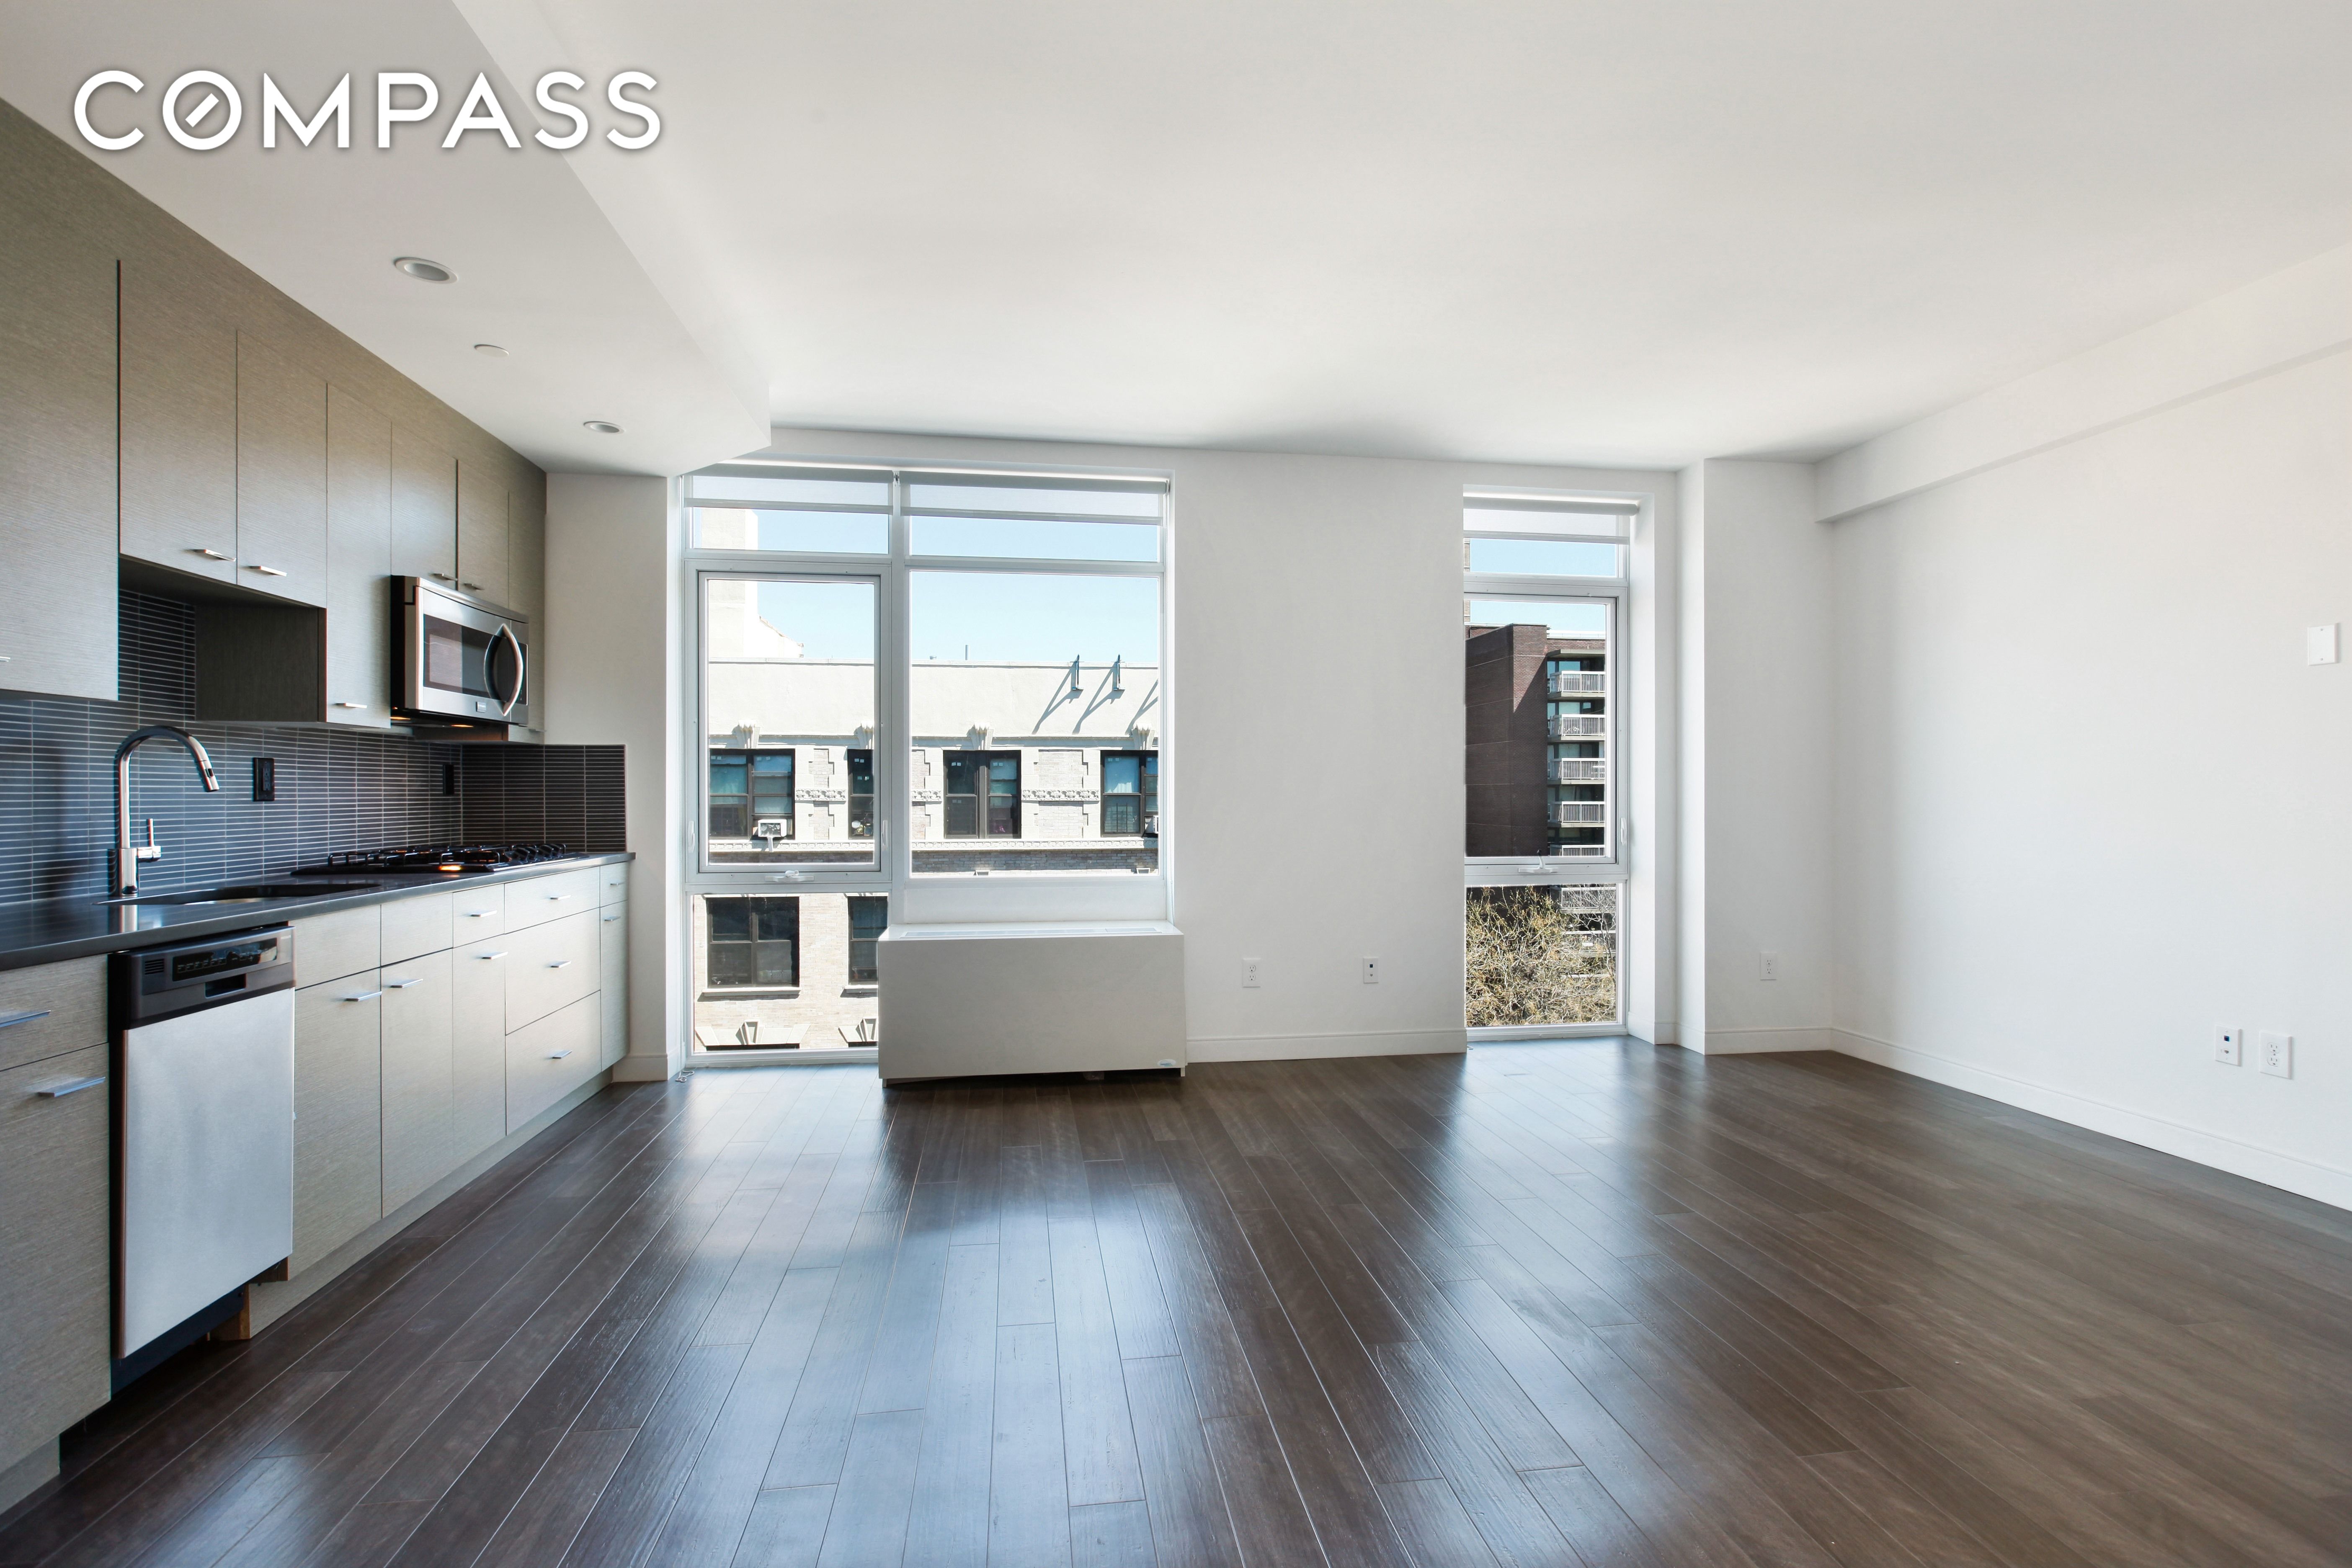 185 Ave B 4D, East Village, Downtown, NYC - 1 Bathrooms  
2 Rooms - 